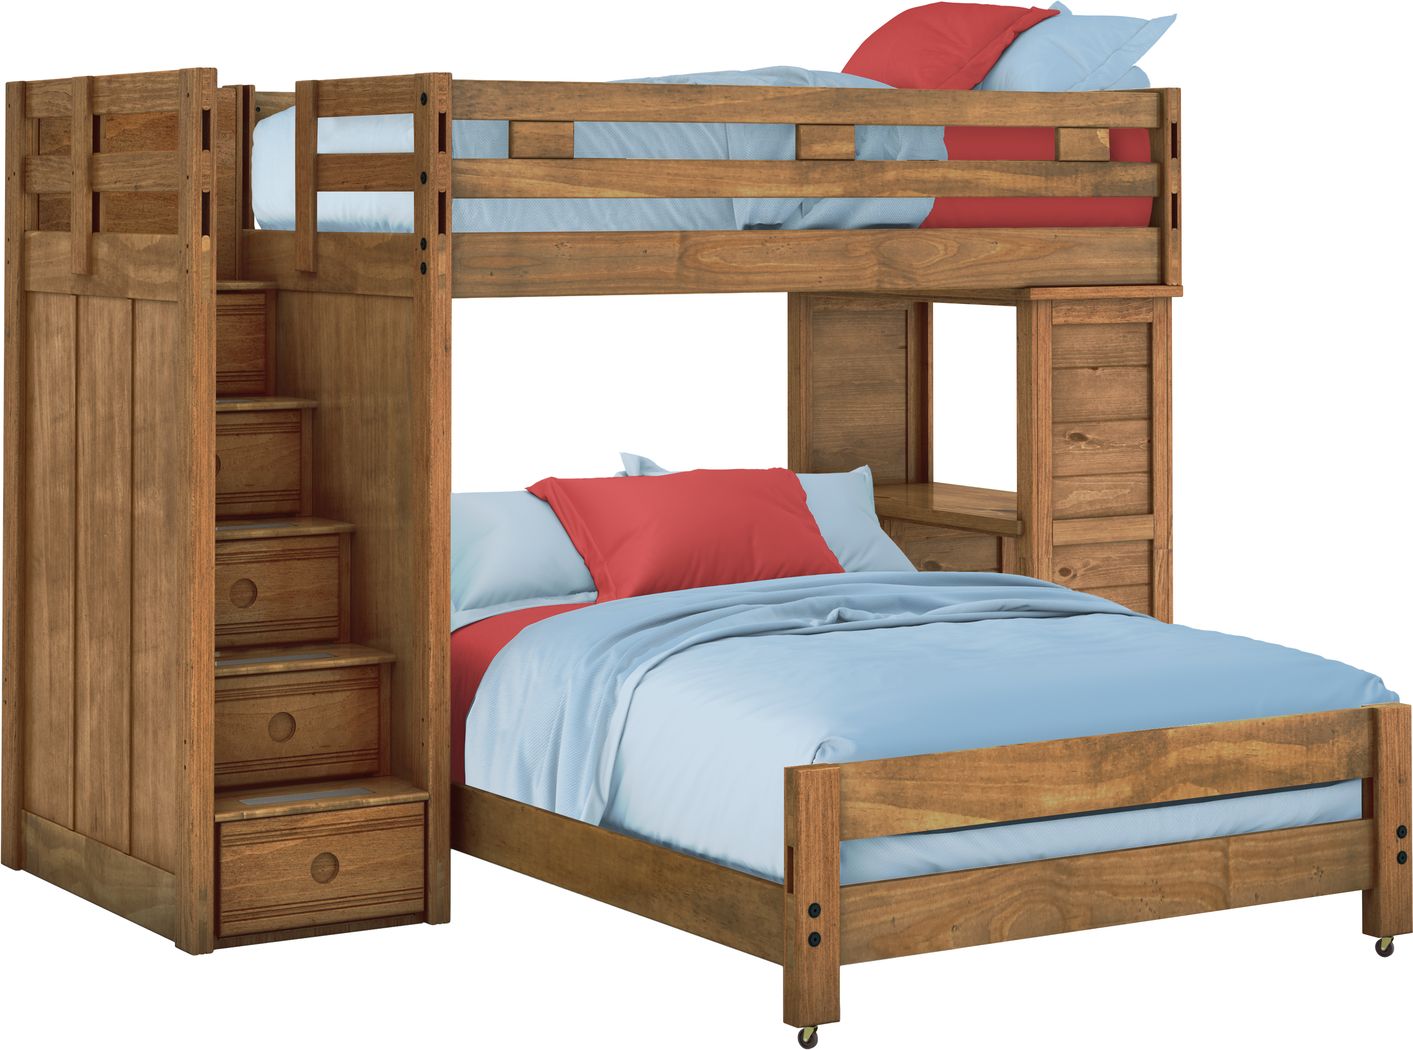 Bunk Beds With Steps Or Stairs, Twin Over Full Bunk Bed With Stairs And Dresser